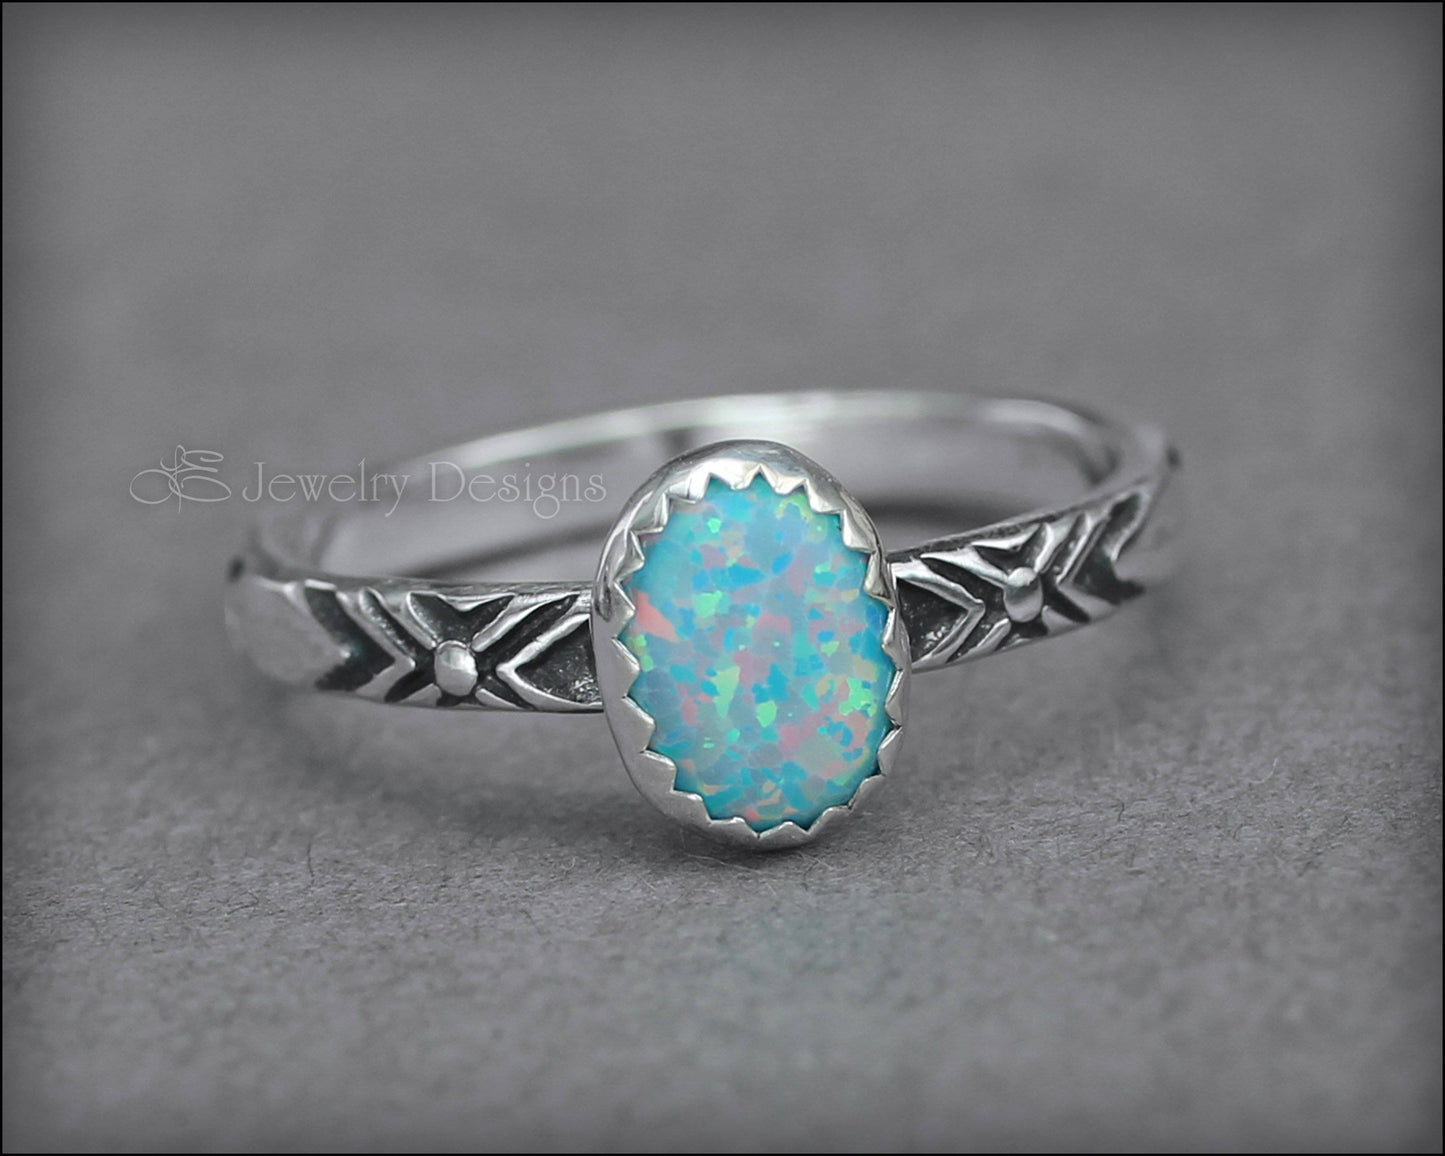 Oval Opal Pattern Ring - (choose color) - LE Jewelry Designs